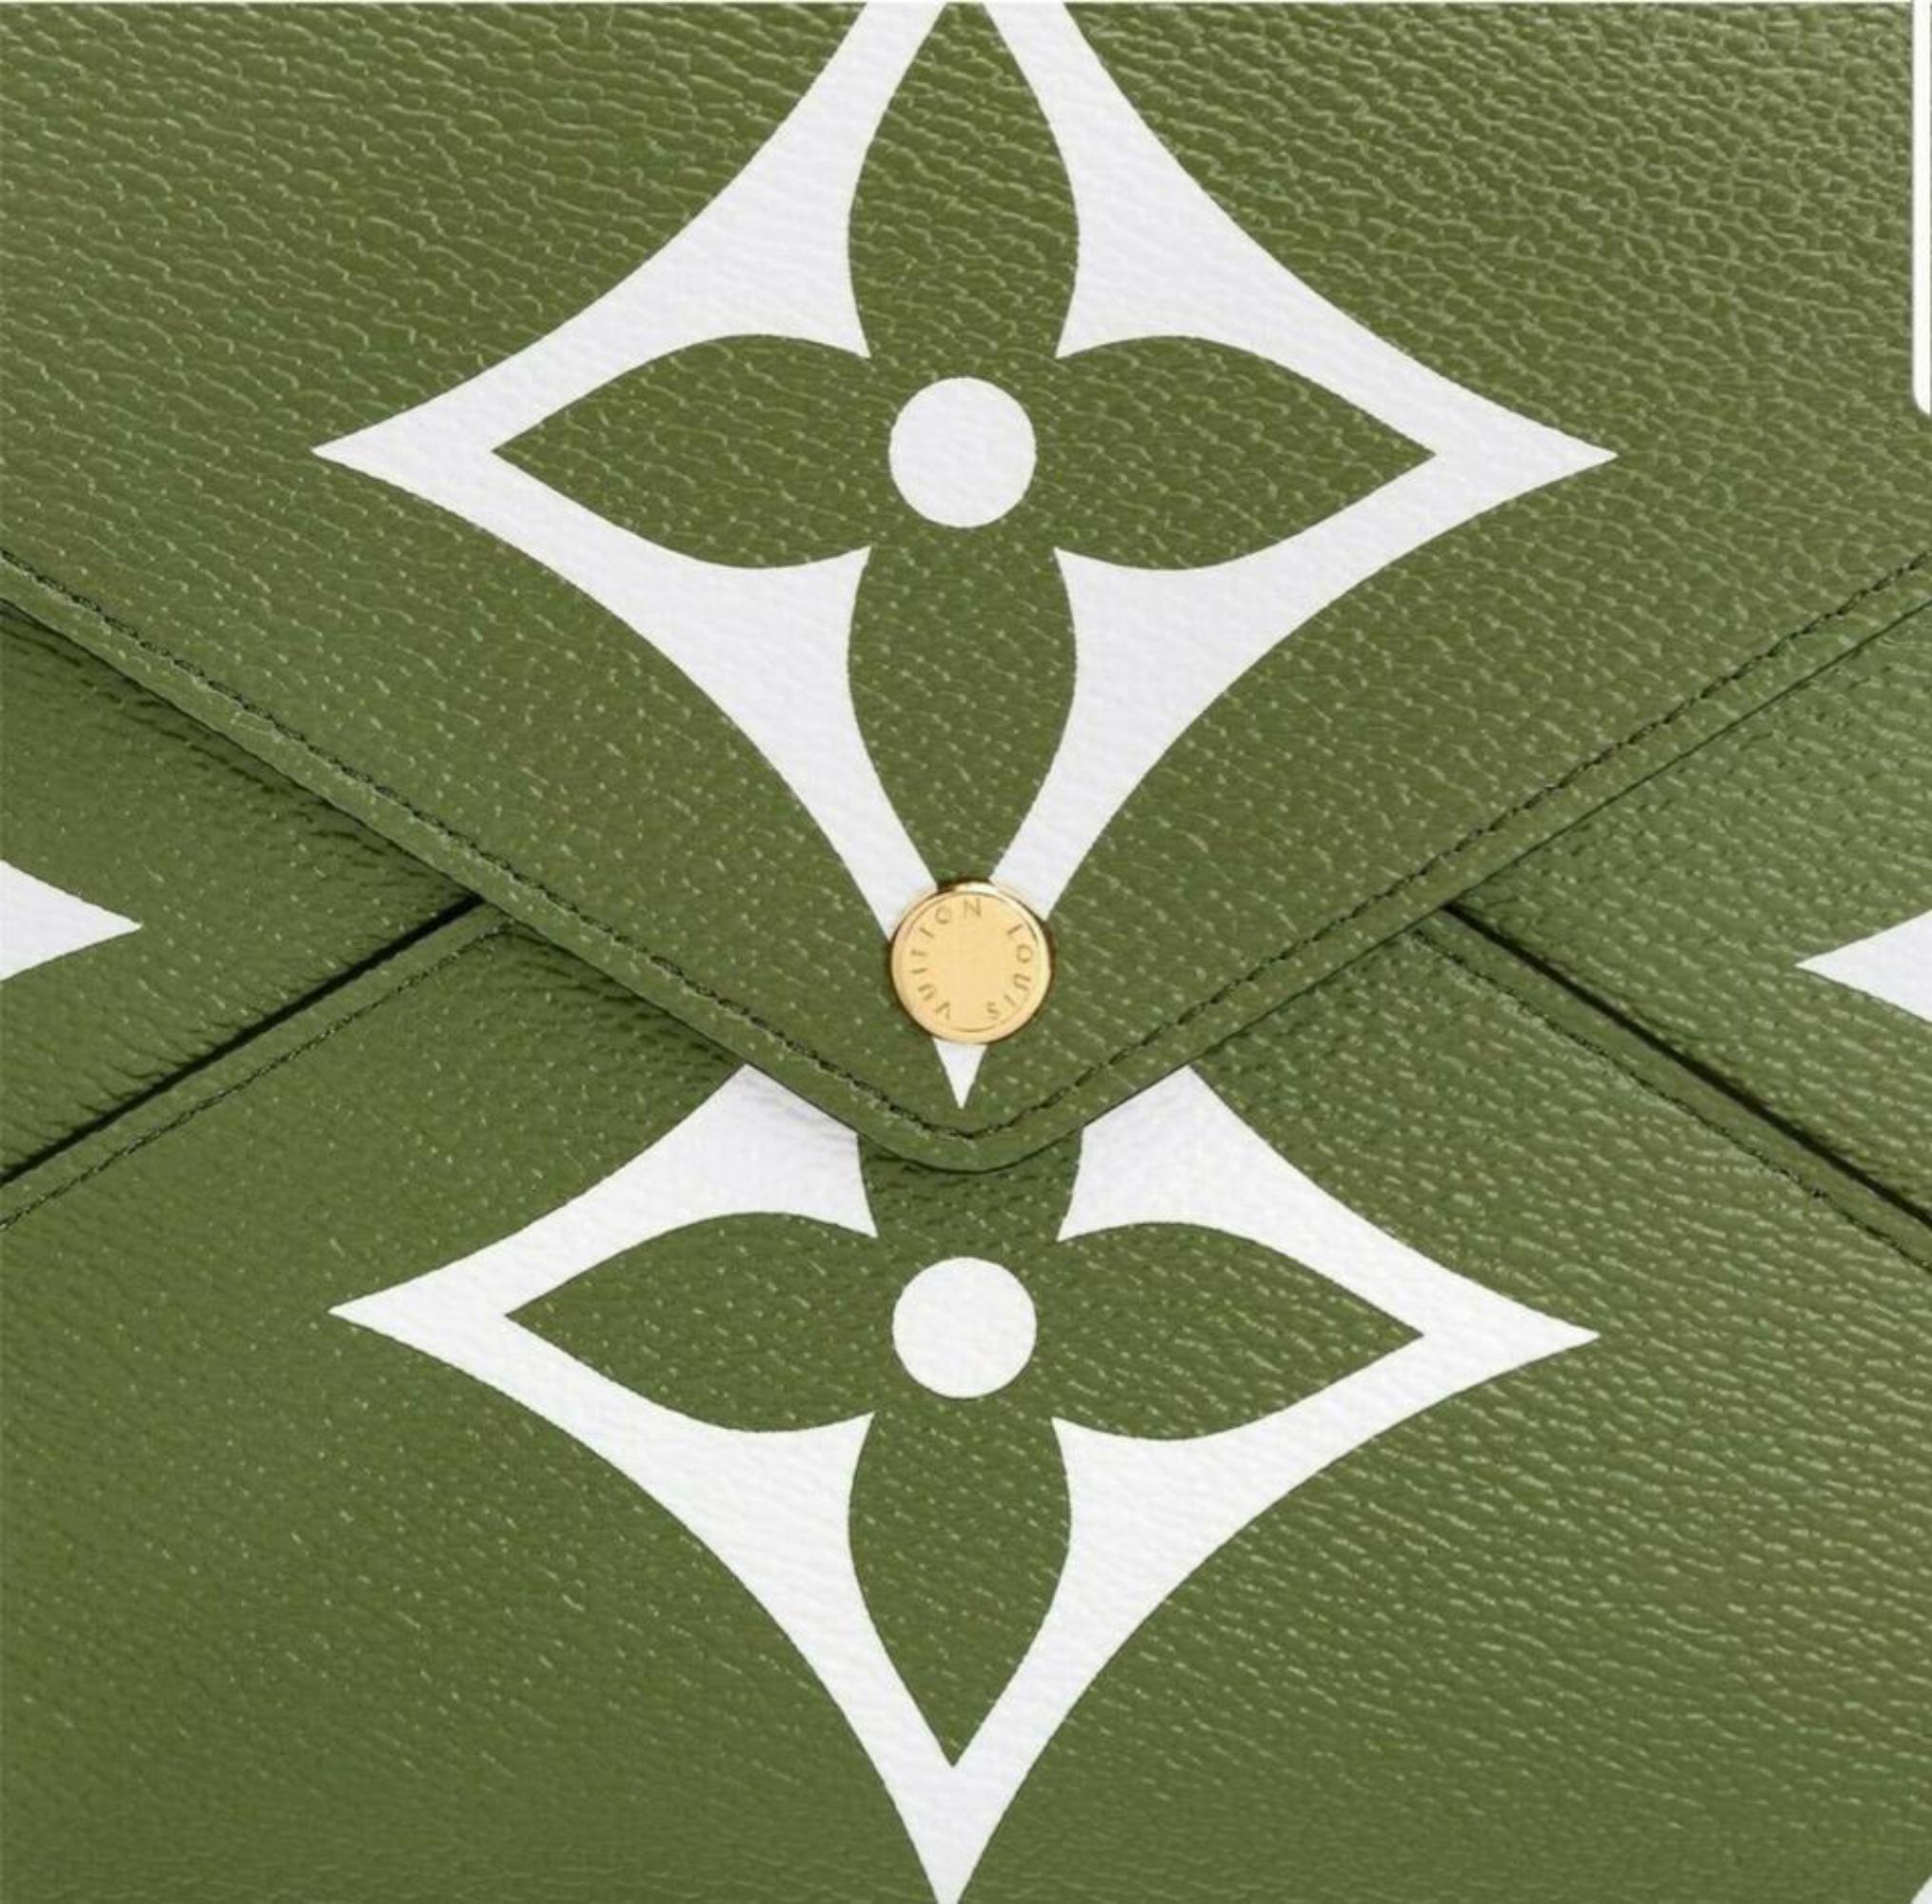 Louis Vuitton Khaki Large Ss19 Limited Edition Giant Kirigami Pouch 870618  For Sale 7